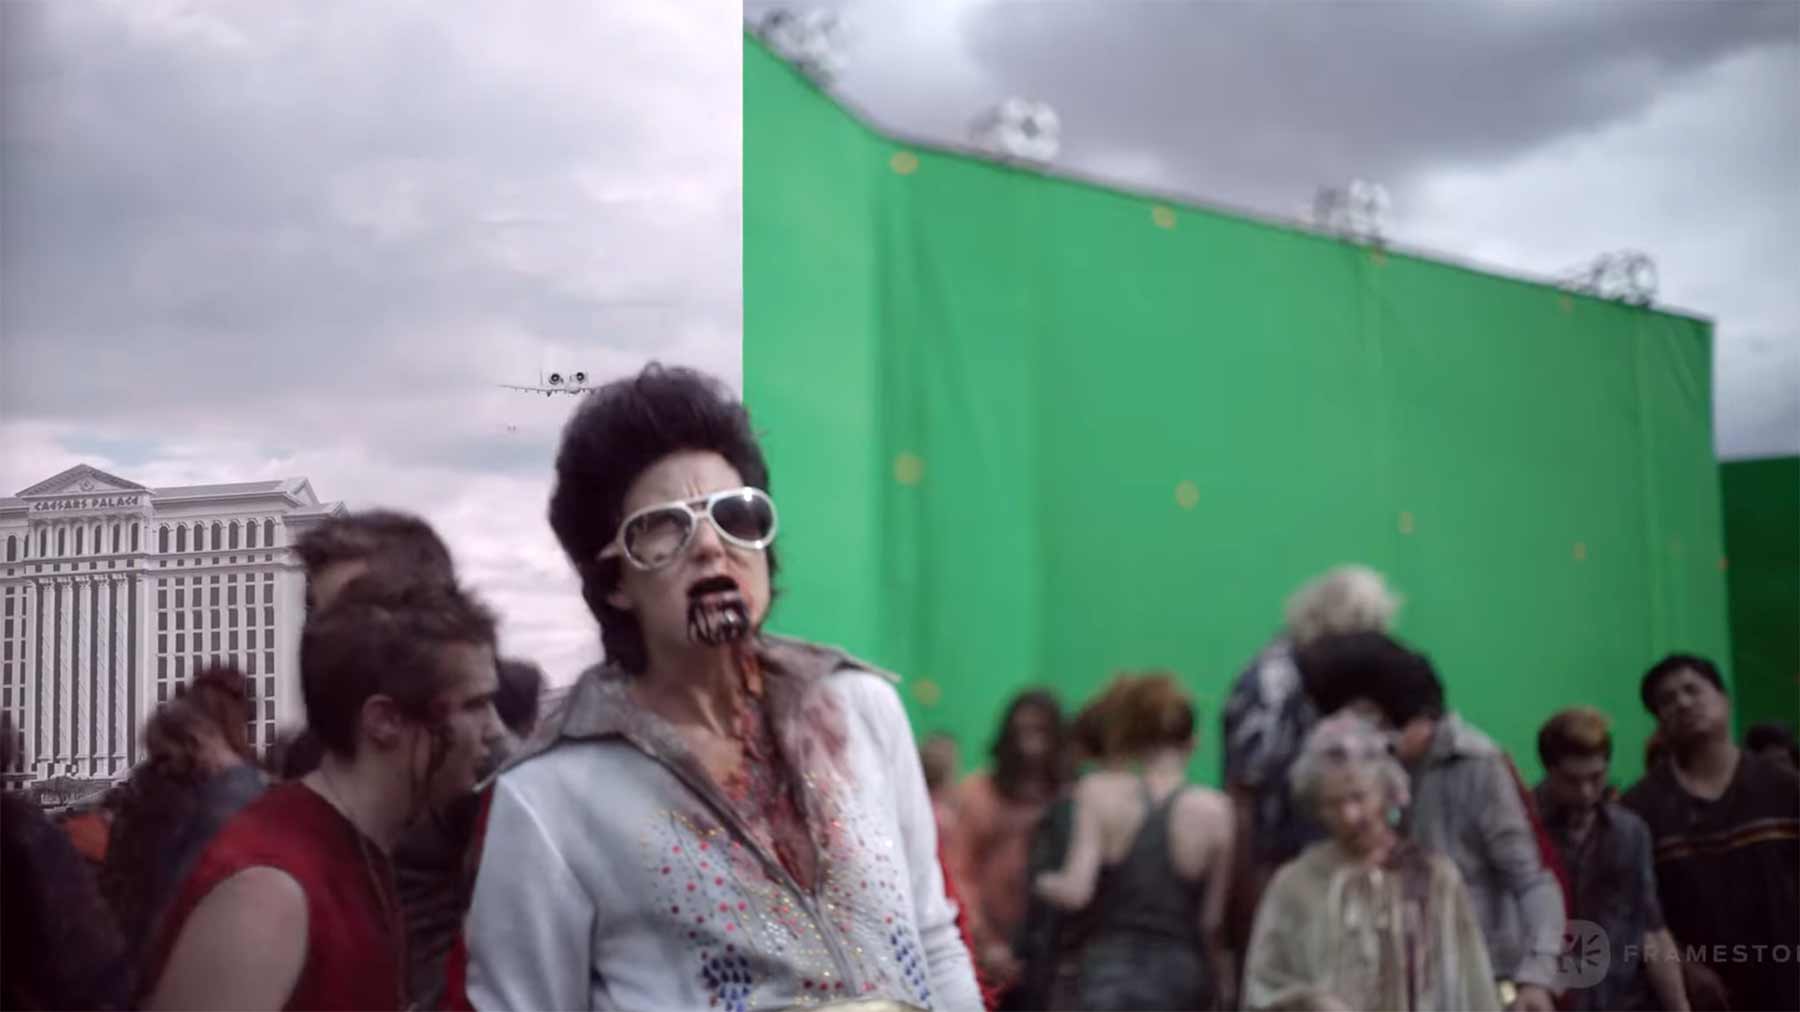 Making of "Army of the Dead" Army-of-the-Dead-netflix-cgi-making-of 